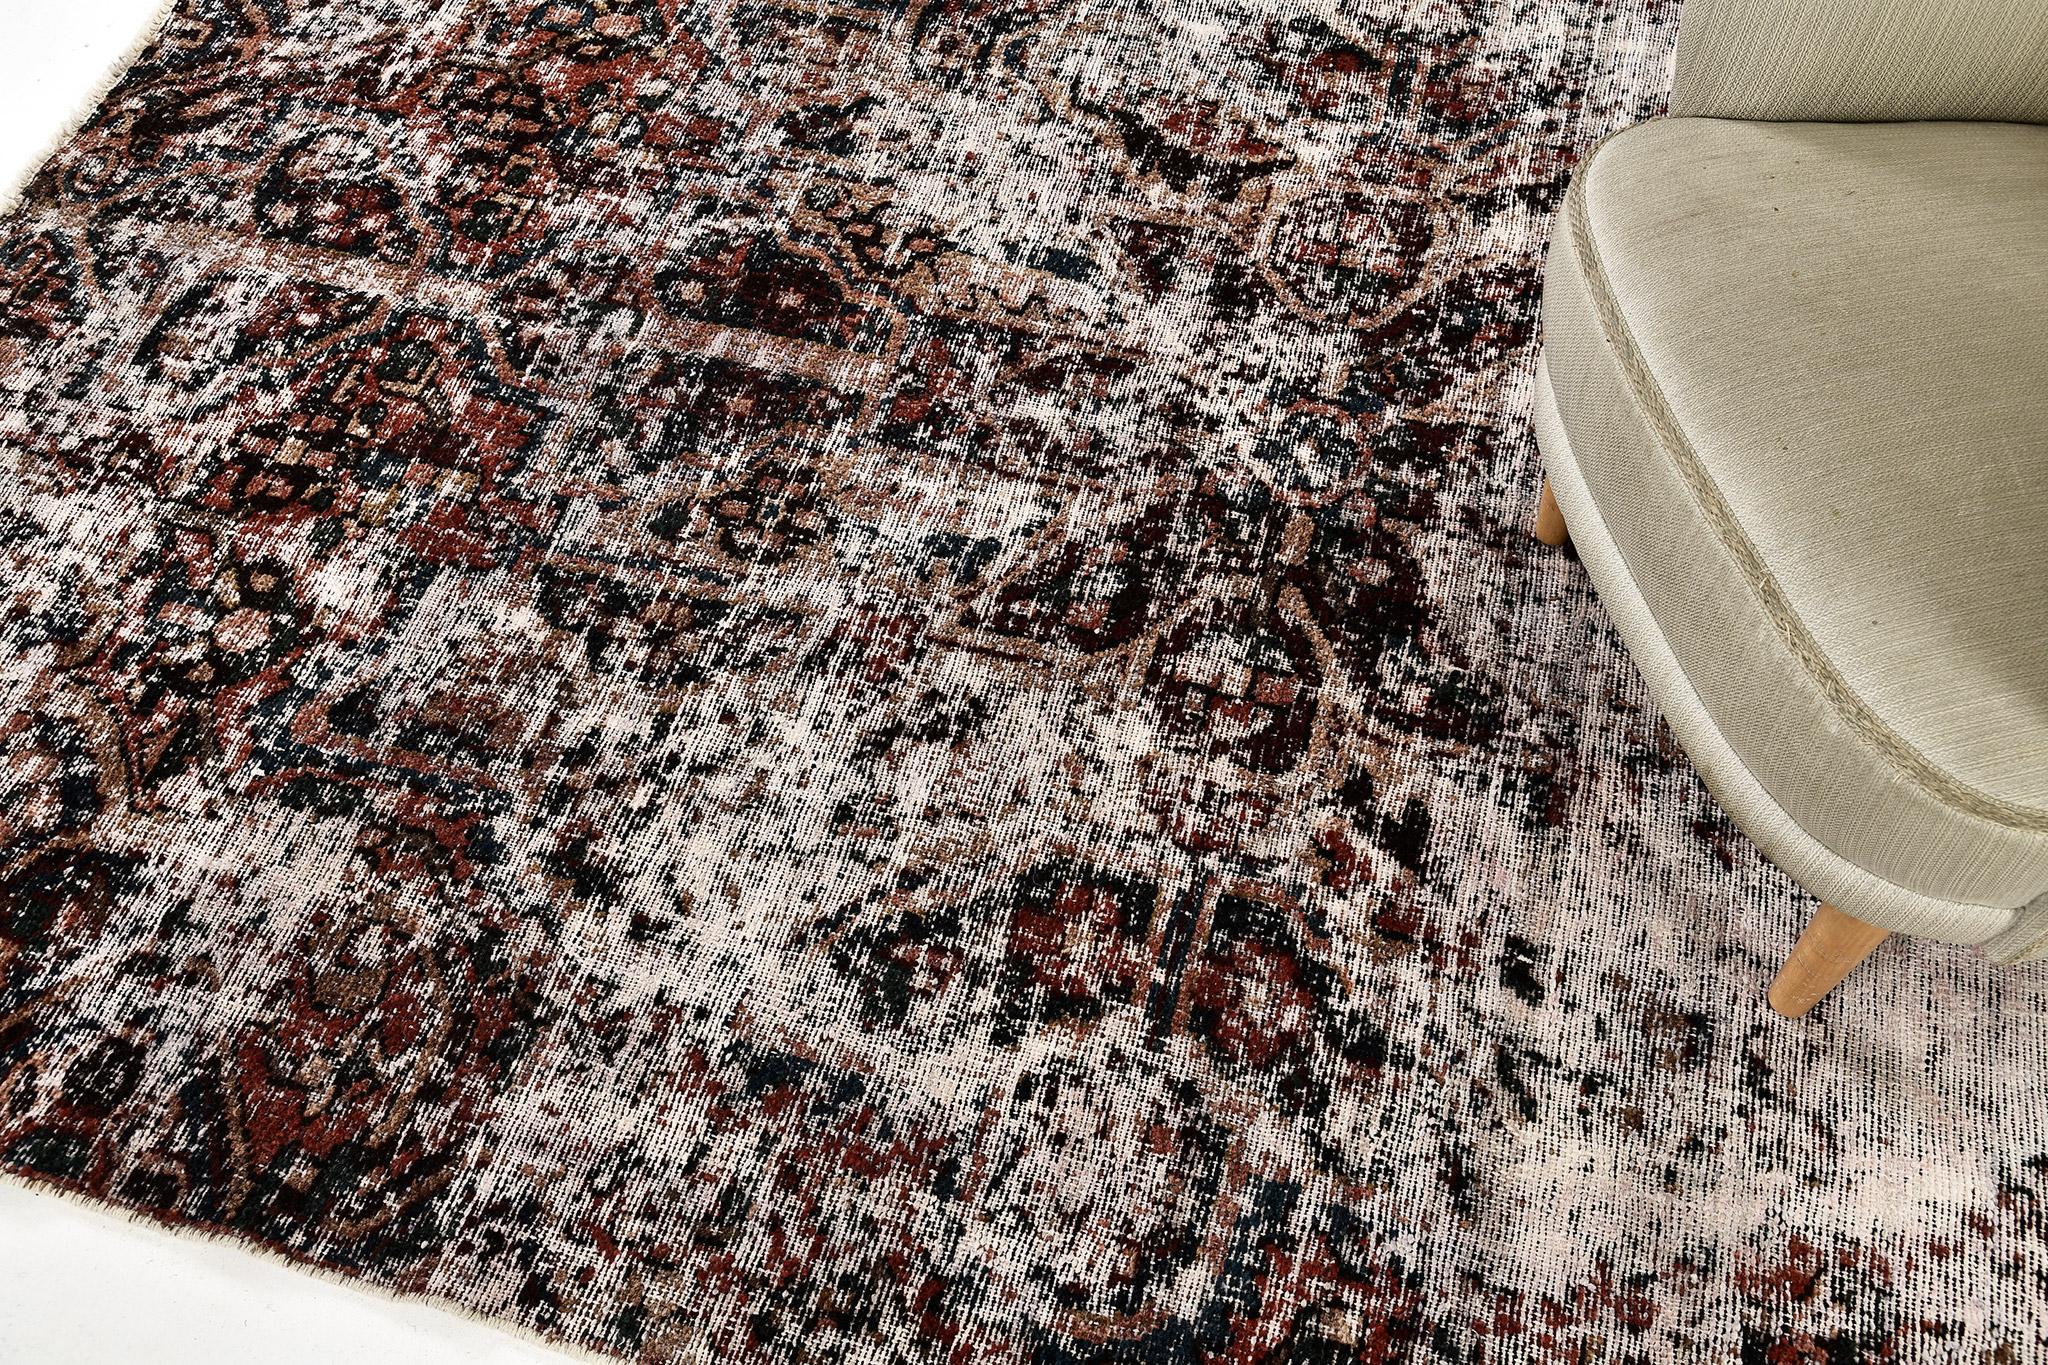 You deserve to have a grandiose entrance with this timeless beauty of Bakhtiari Distressed Rug. A hand-spun wool Bakhtiari Rug is known for its durability and it is perfect at your doorsteps. A warm welcome from your guests that is absolutely a